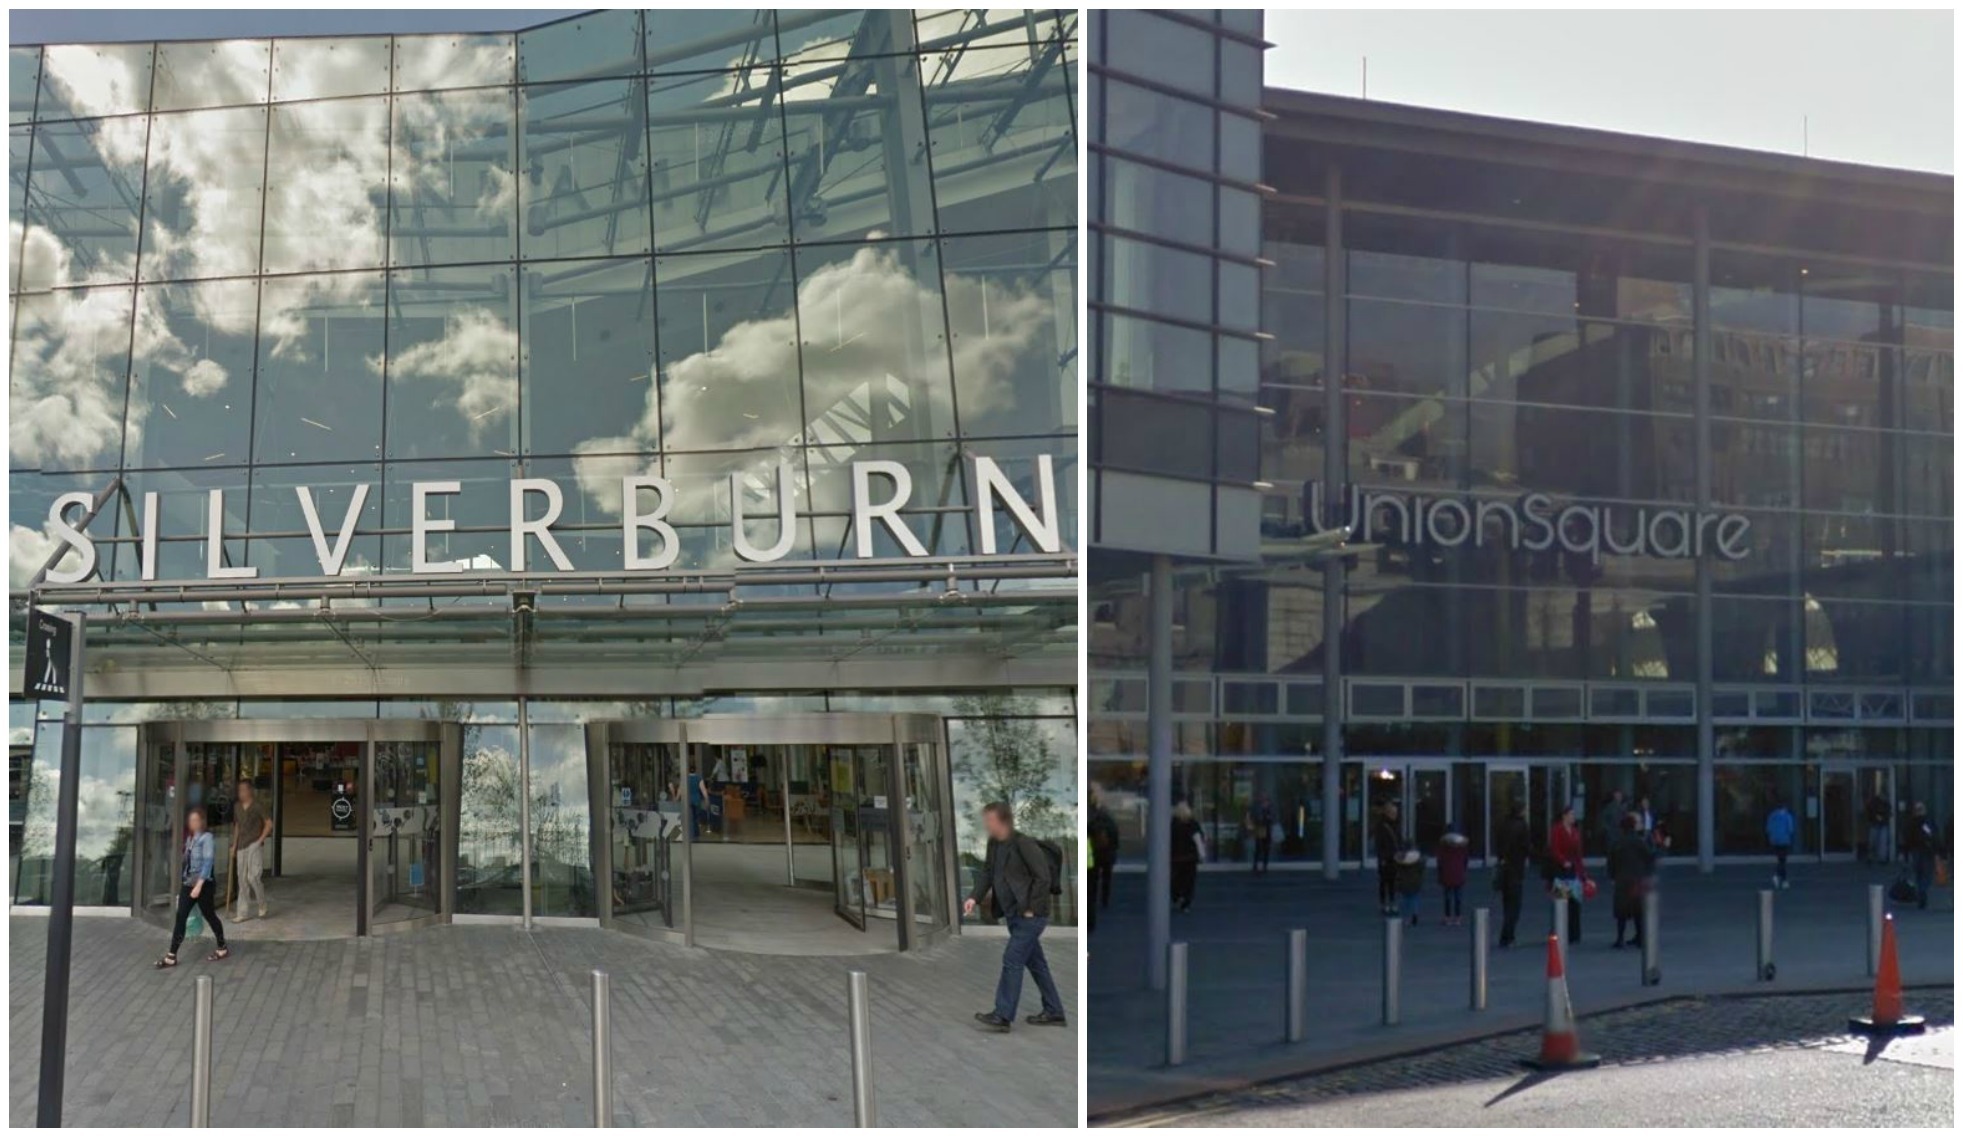 Glasgow's Silverburn and Aberdeen's Union Square have increased security measures